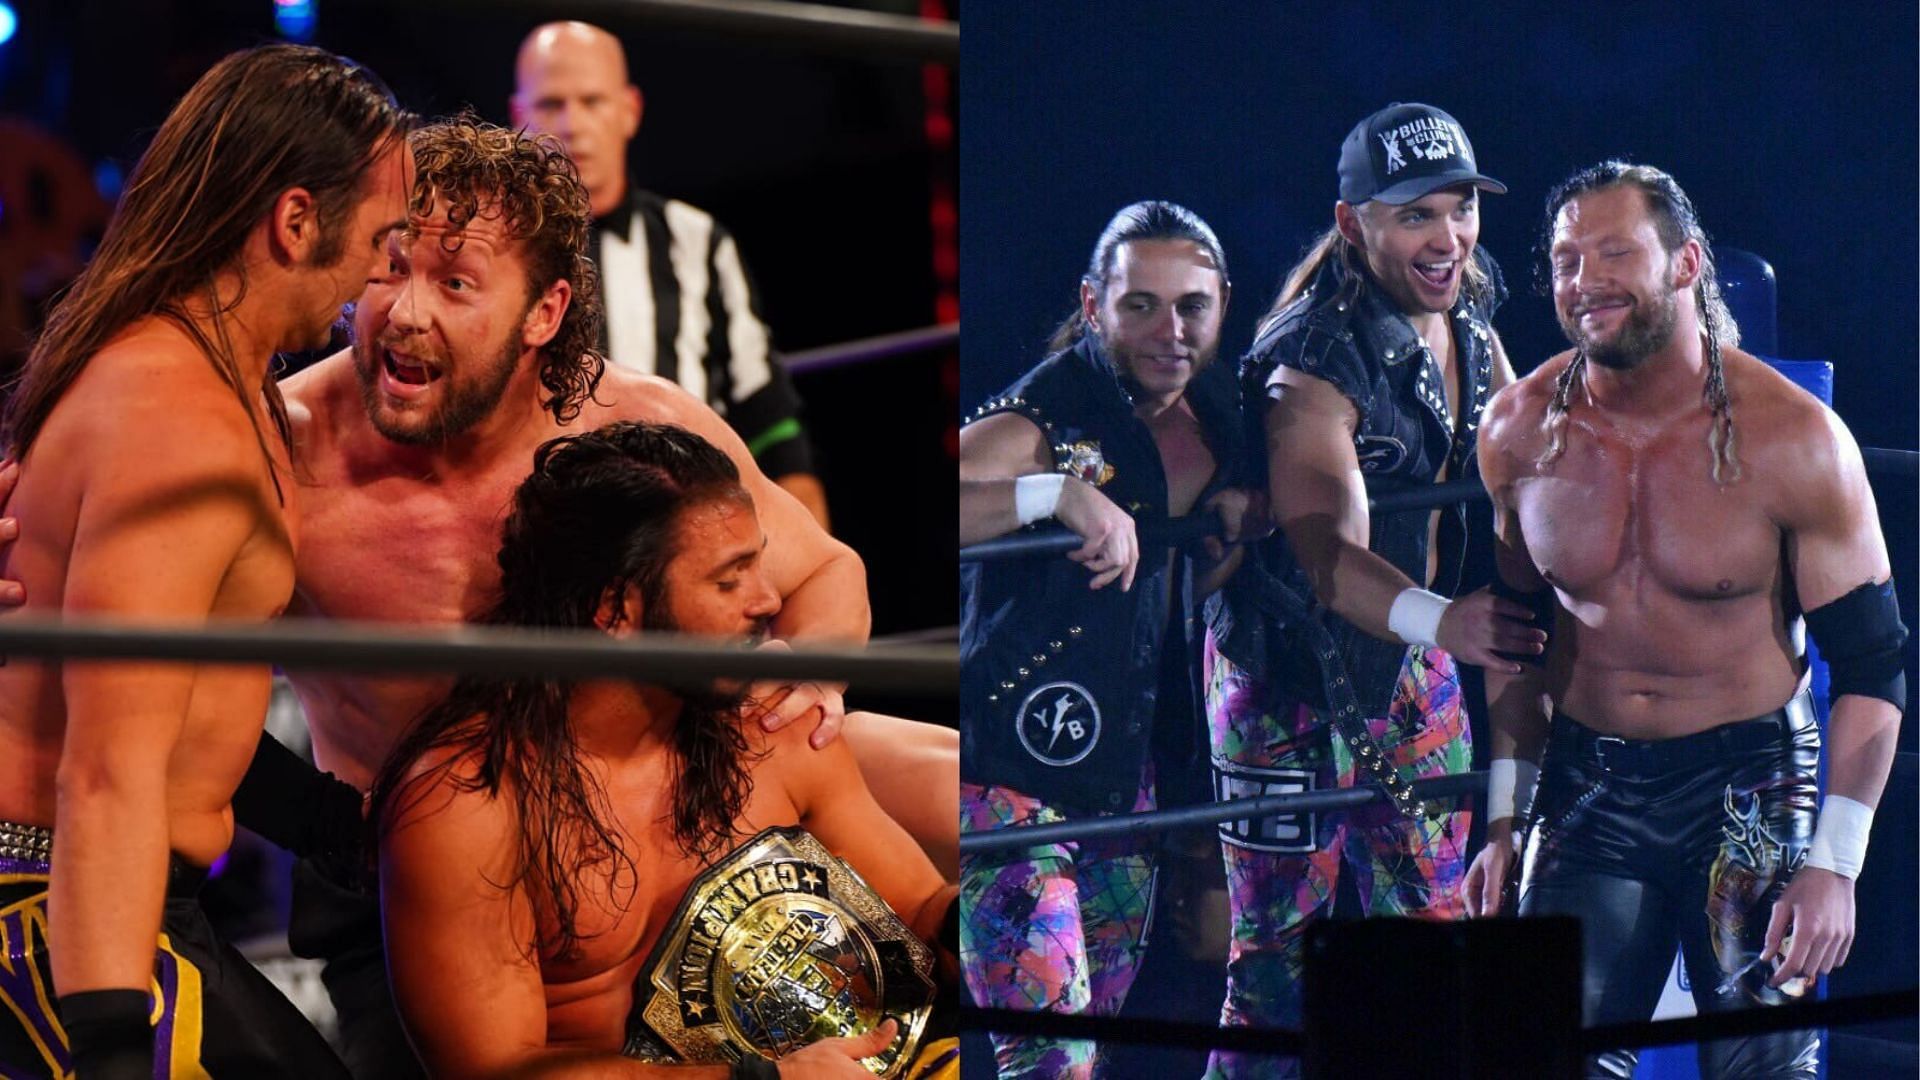 Kenny Omega and The Young Bucks have been called out by a Bullet Club star